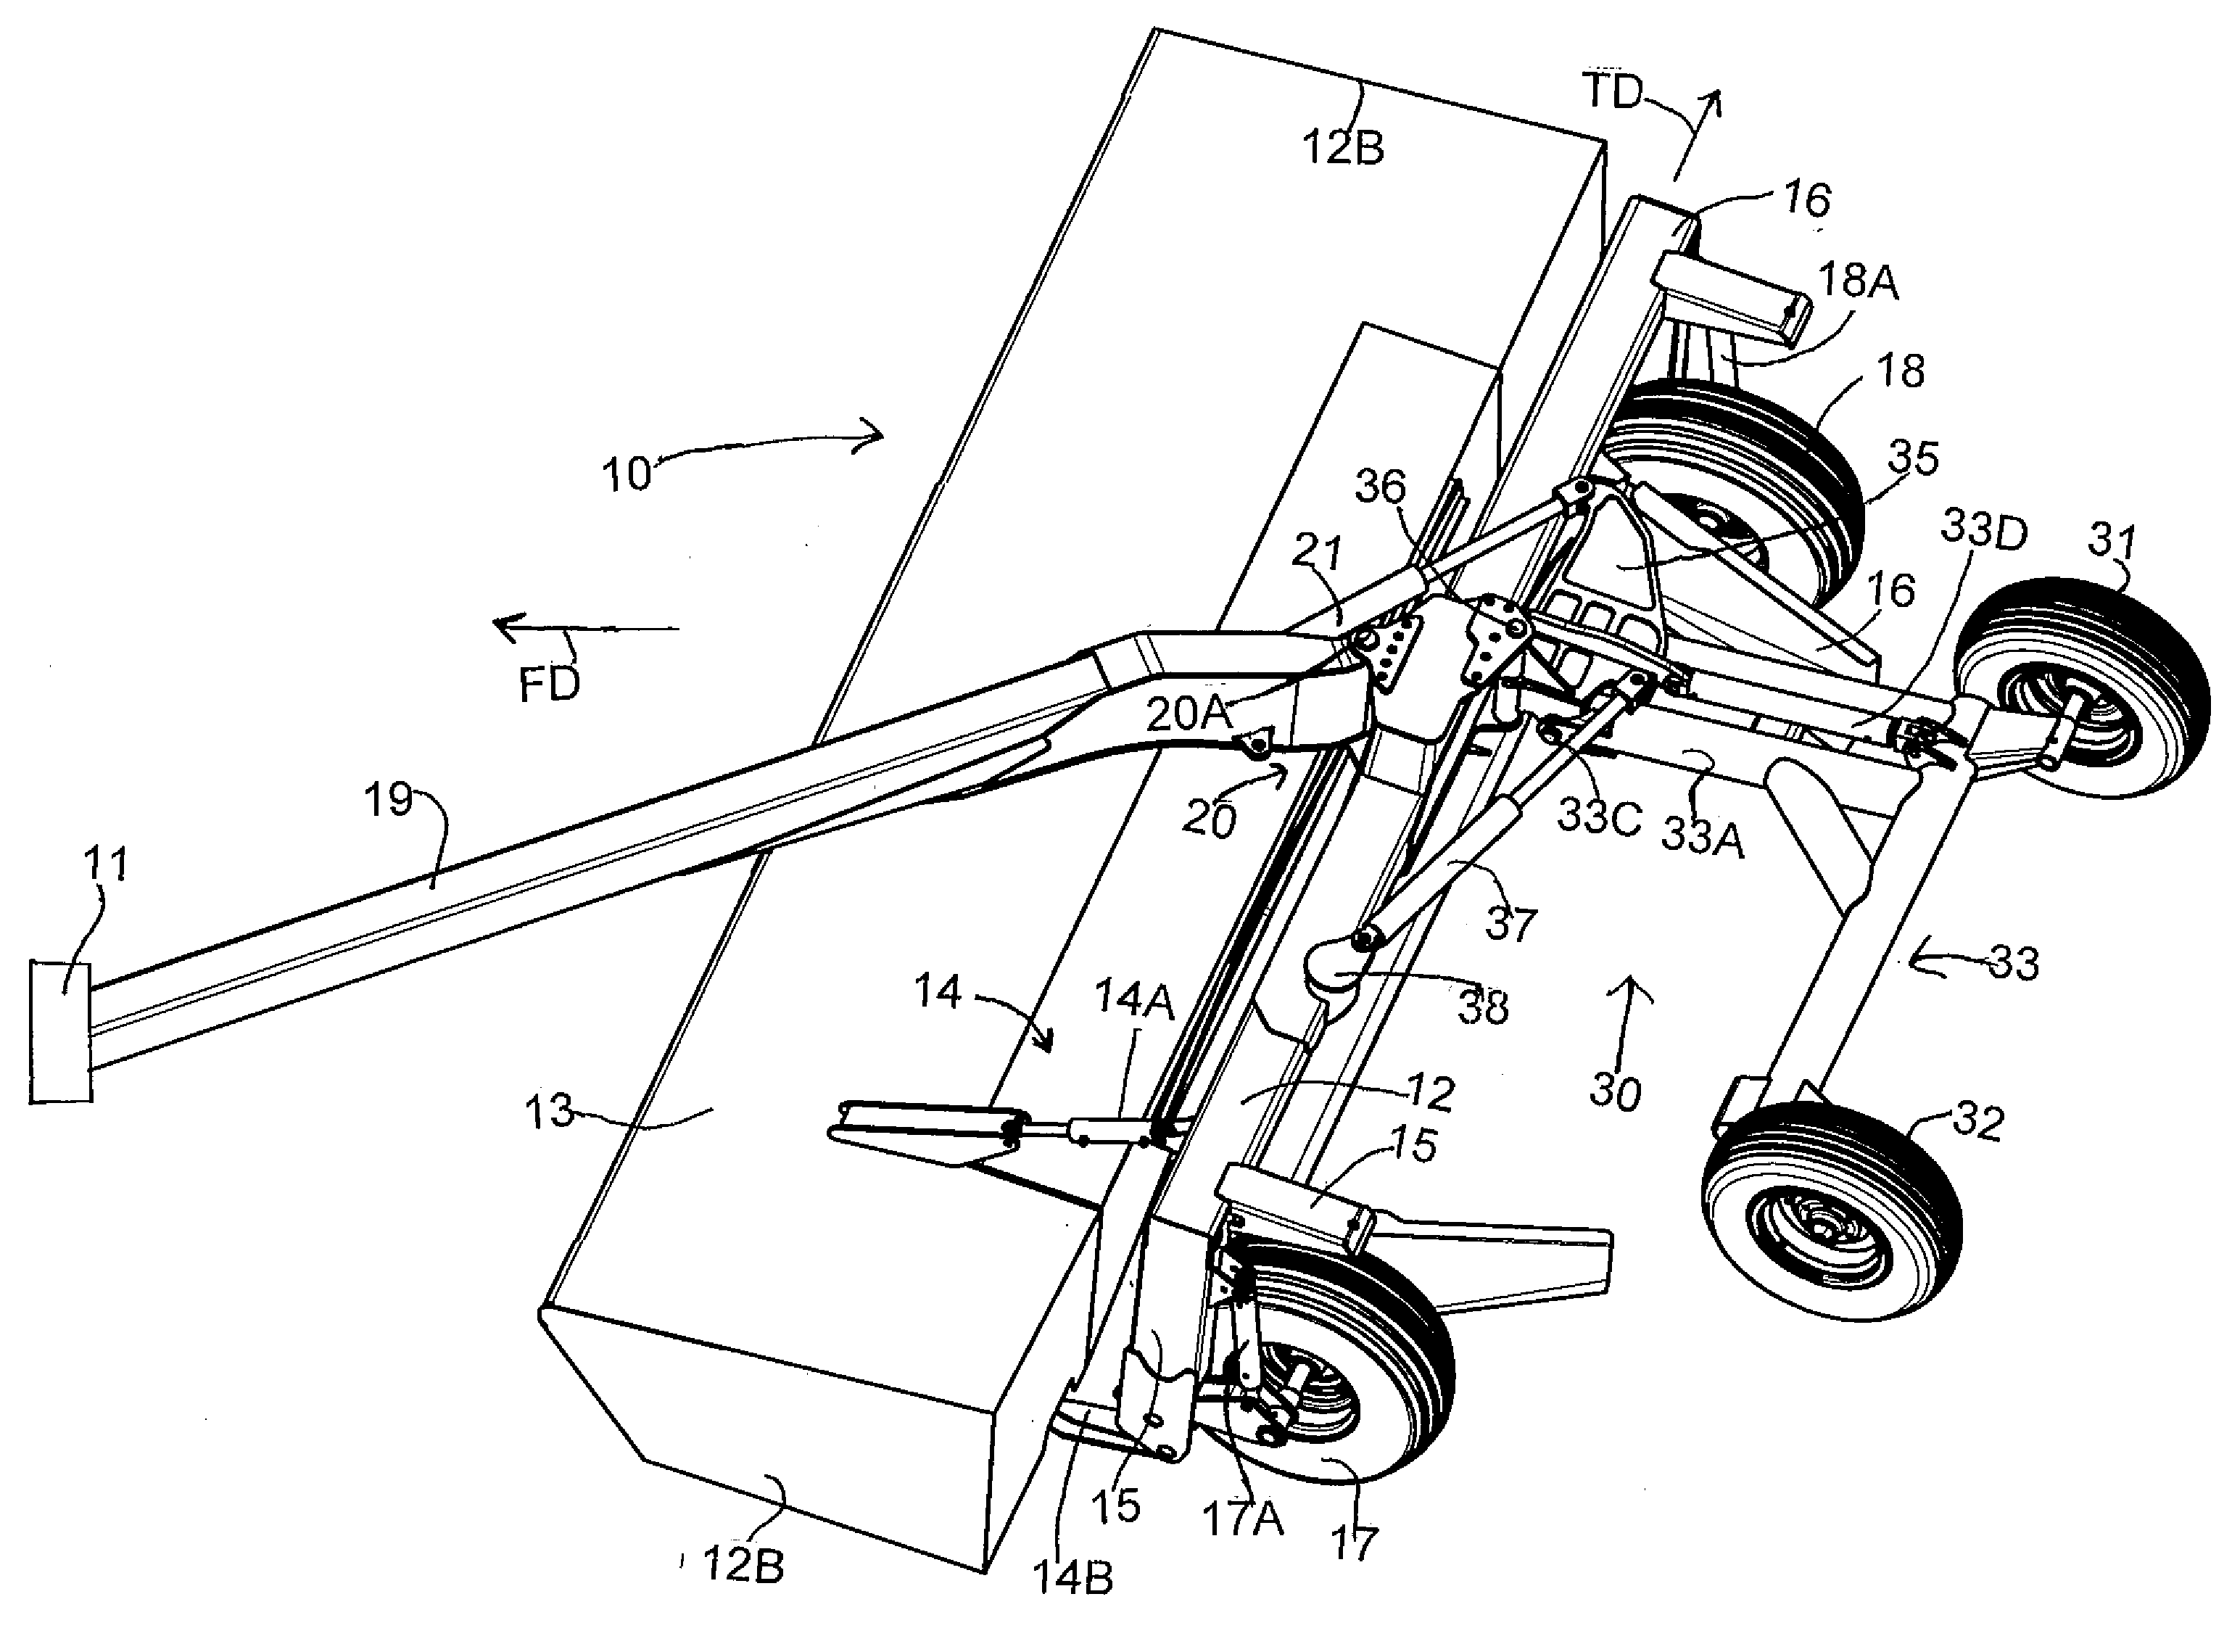 Pull-type crop harvesting machine transport system actuated at a predetermined angle of the hitch